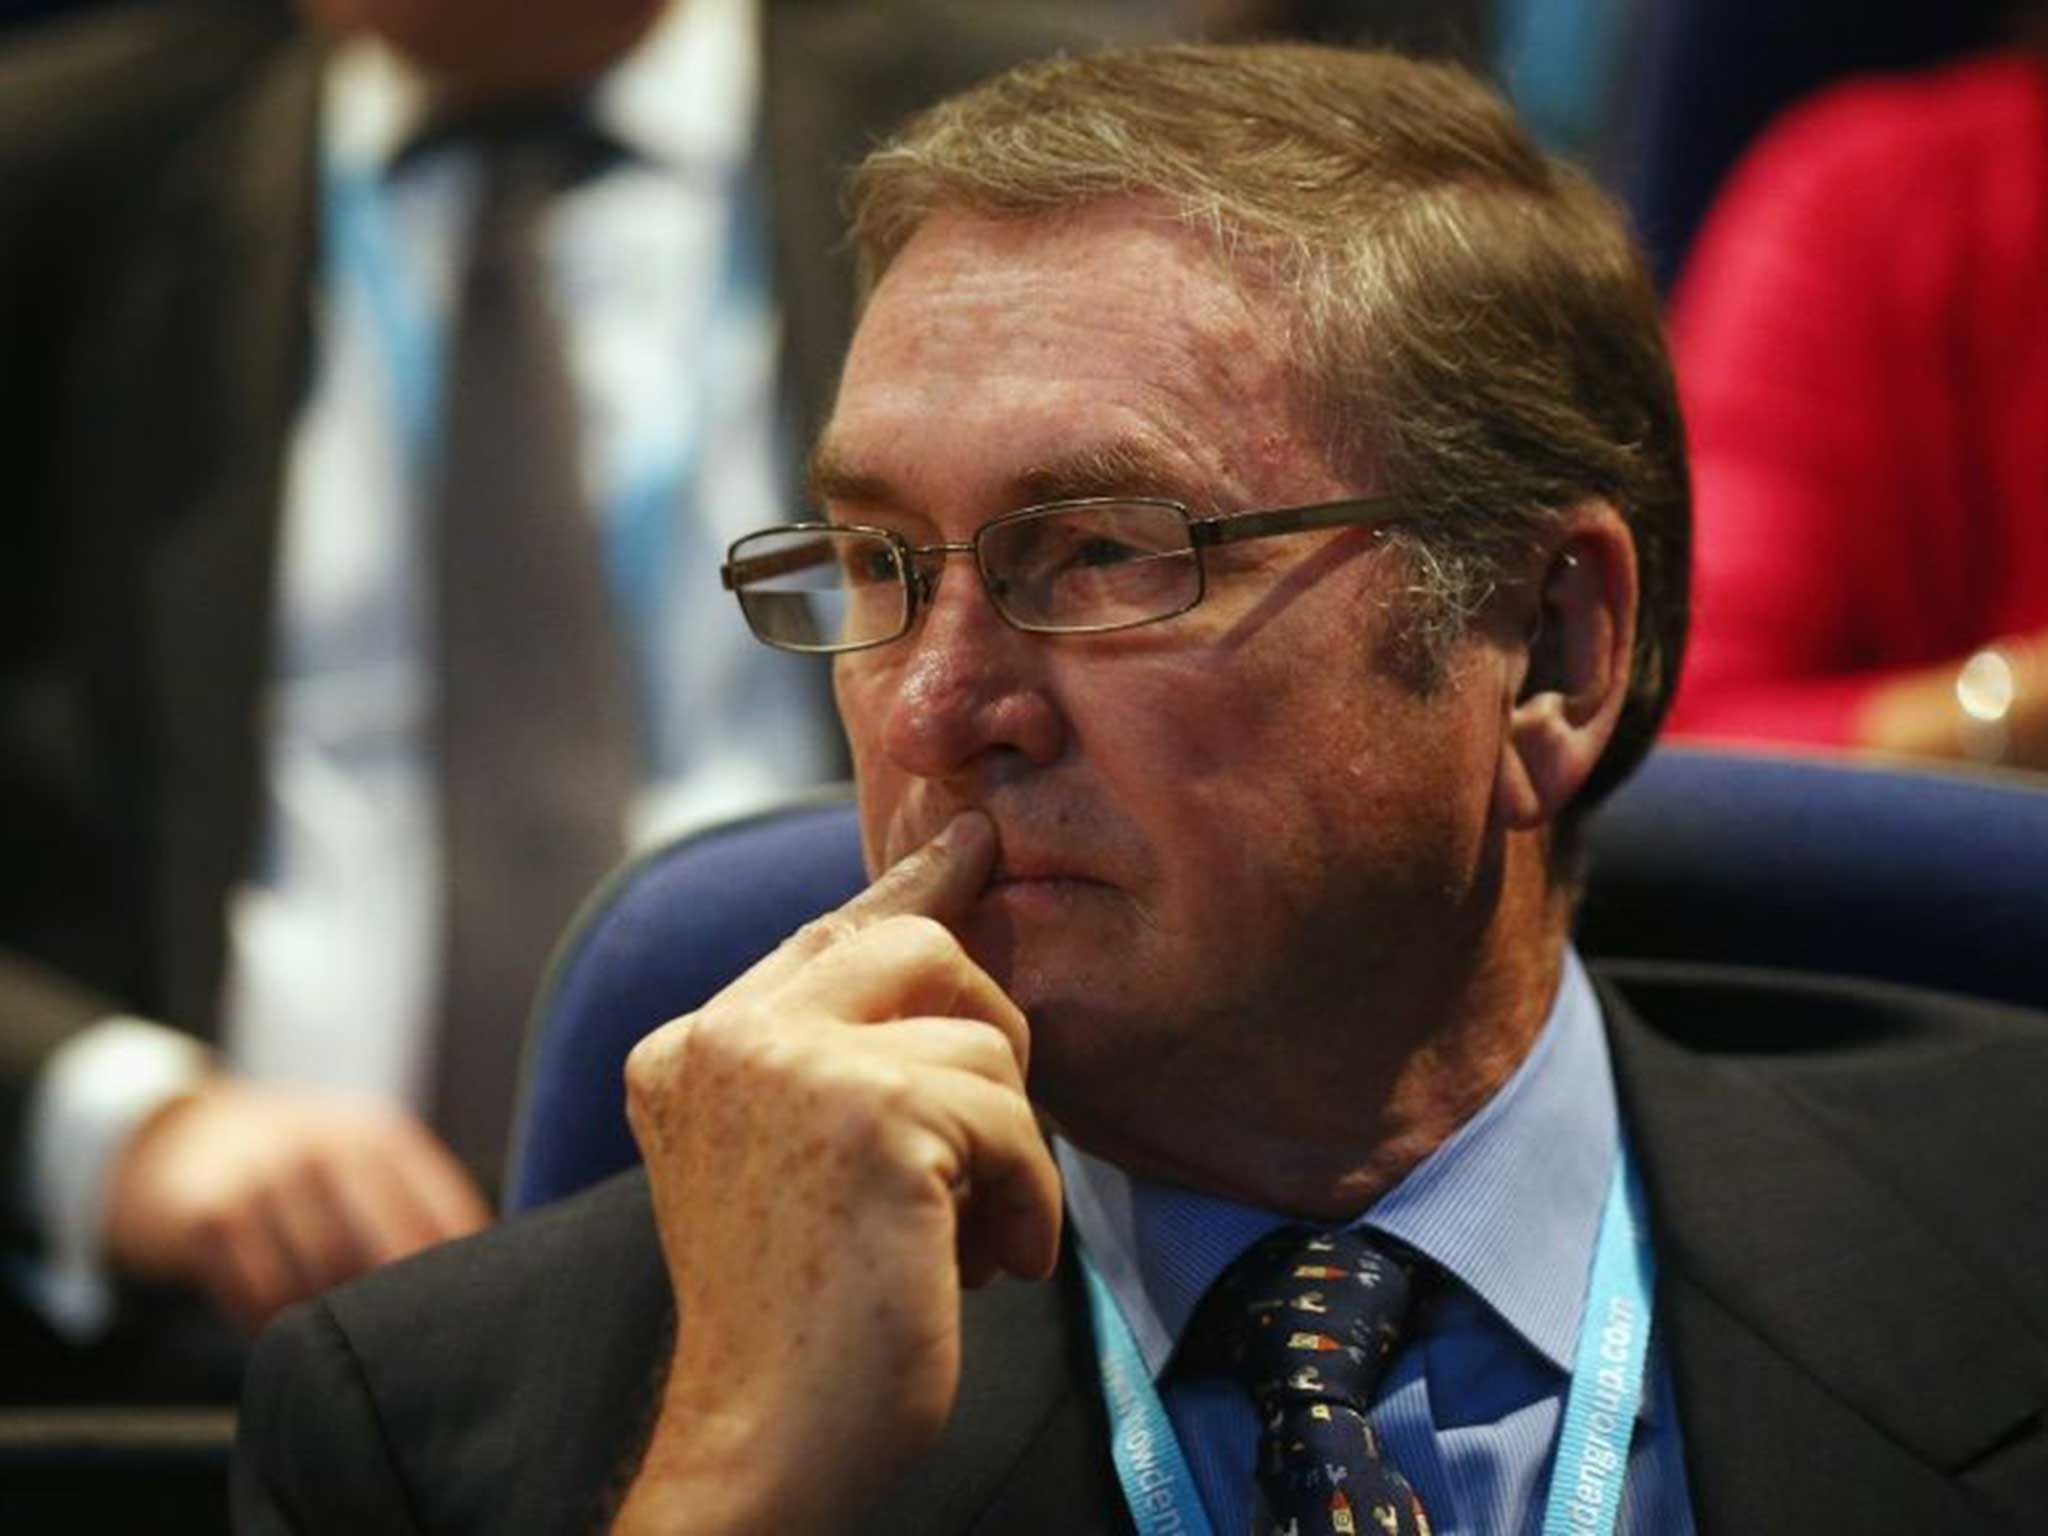 Conservative peer and multimillionaire Lord Michael Ashcroft has made £7.6m by selling his shares in an American company; if he was still sitting in the Lords he would be liable for £2.1m in tax